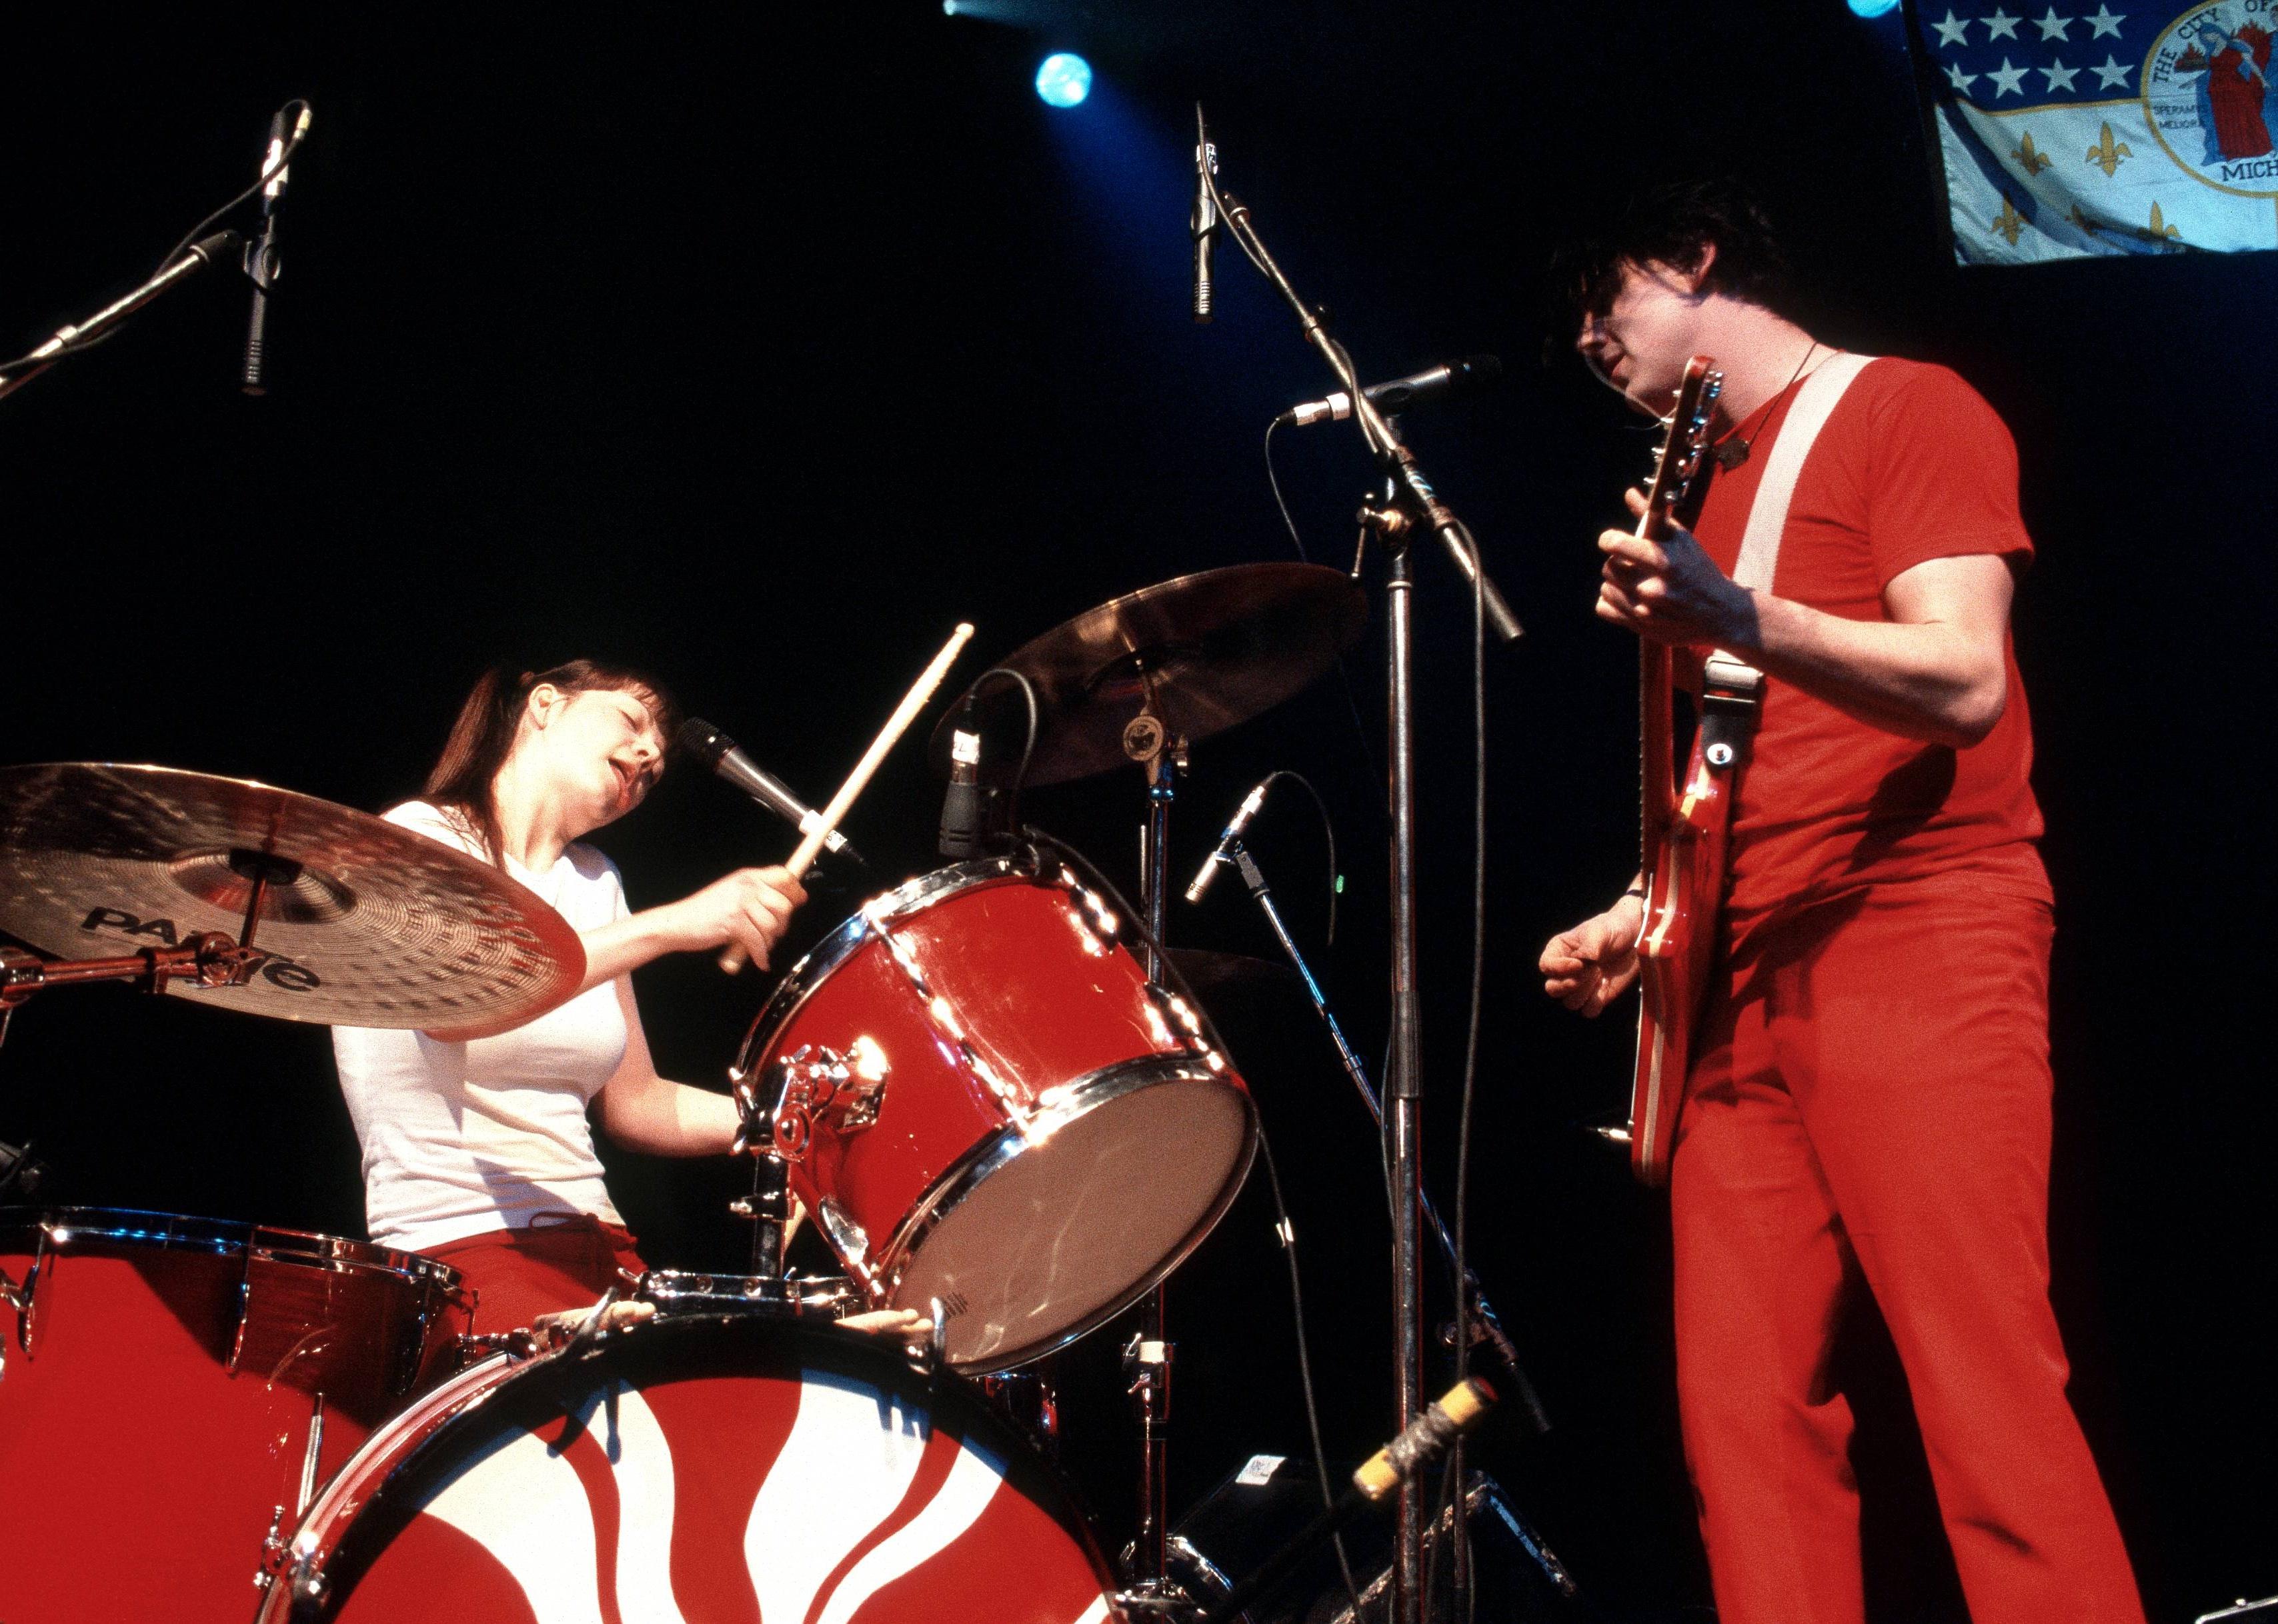 The White Stripes performing in concert